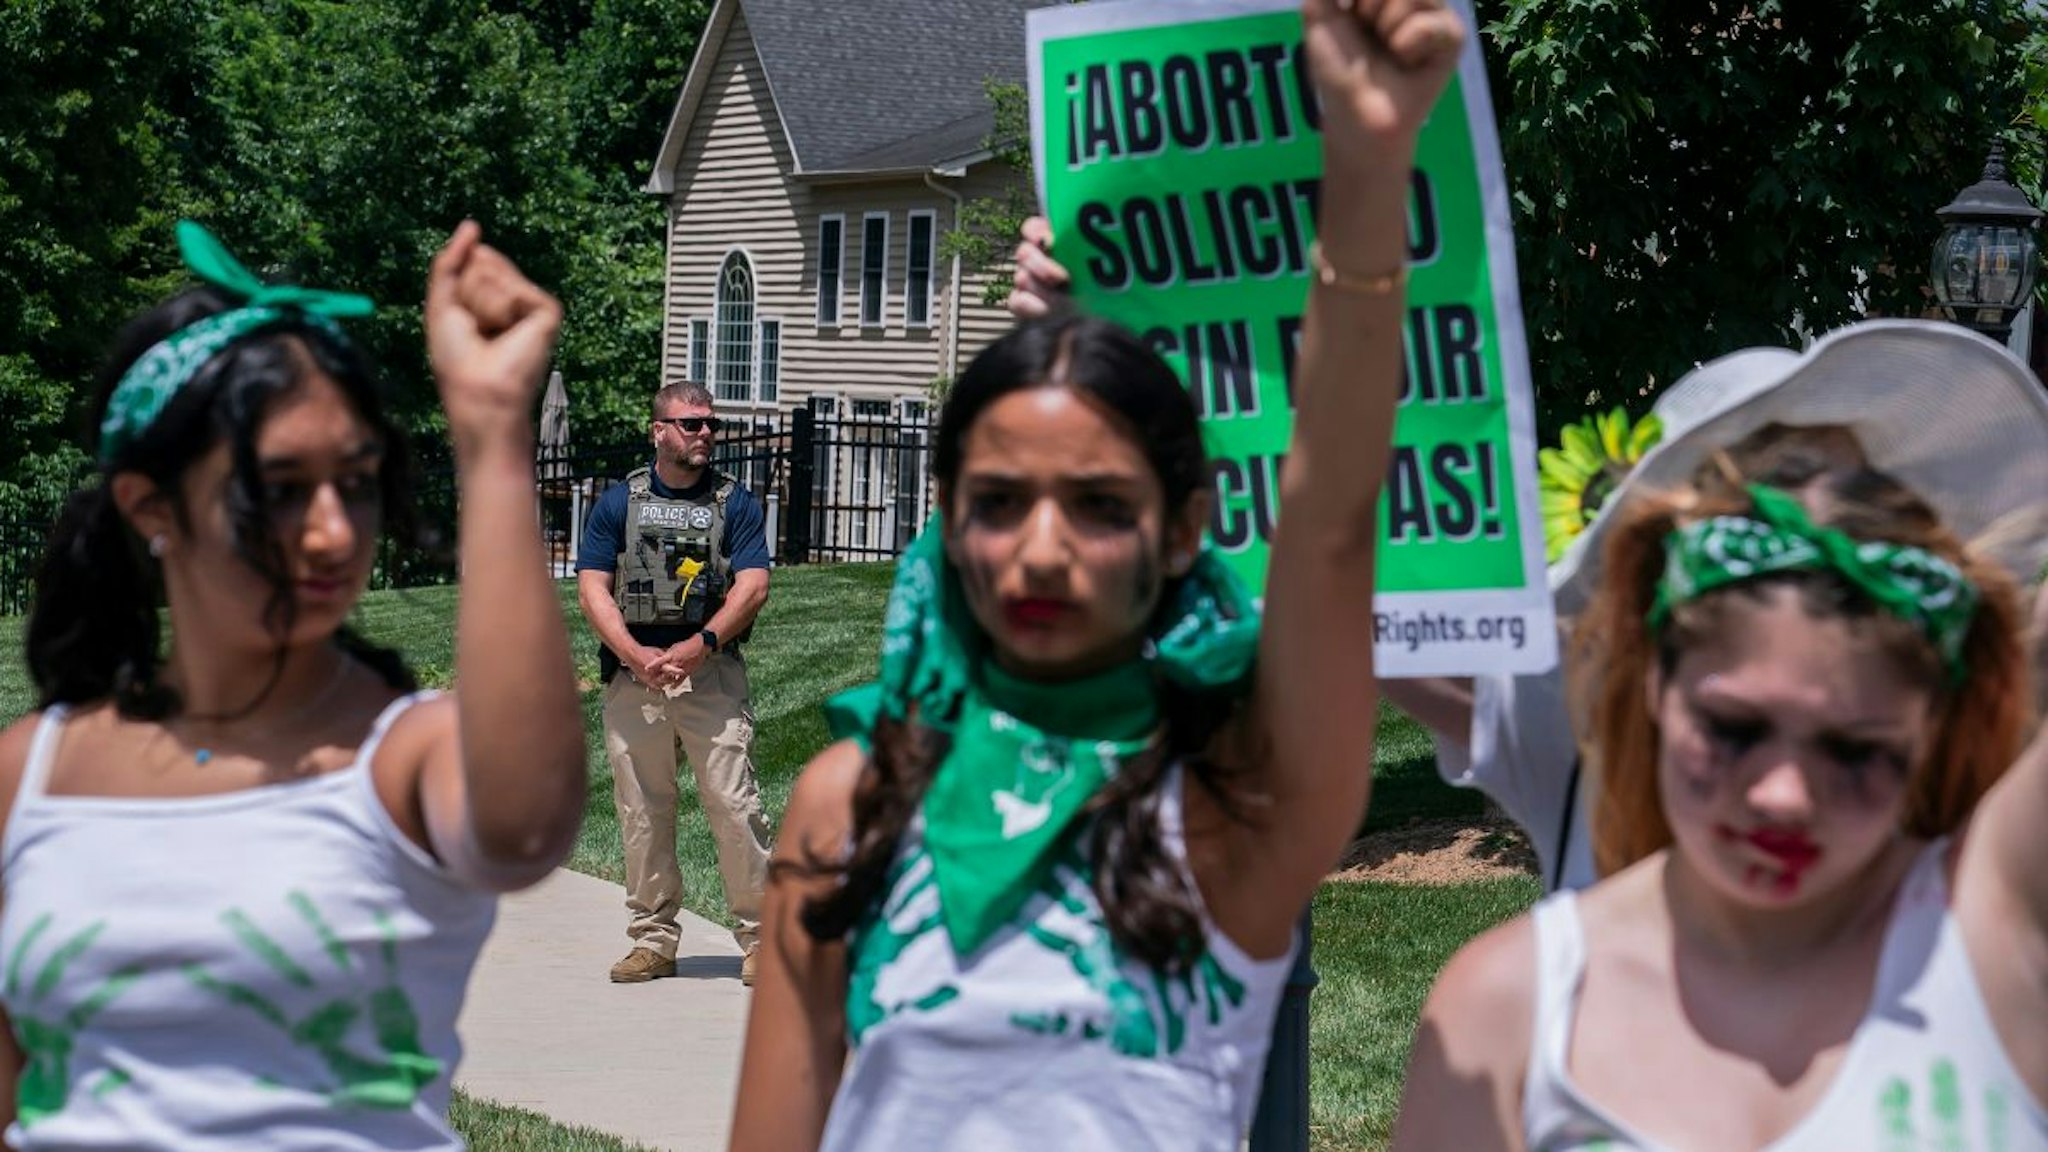 U.S. Marshalls guard the the home of Supreme Court Justice Amy Coney Barrett as abortion-rights activists rally nearby on June 18, 2022 in Falls Church, Virginia.